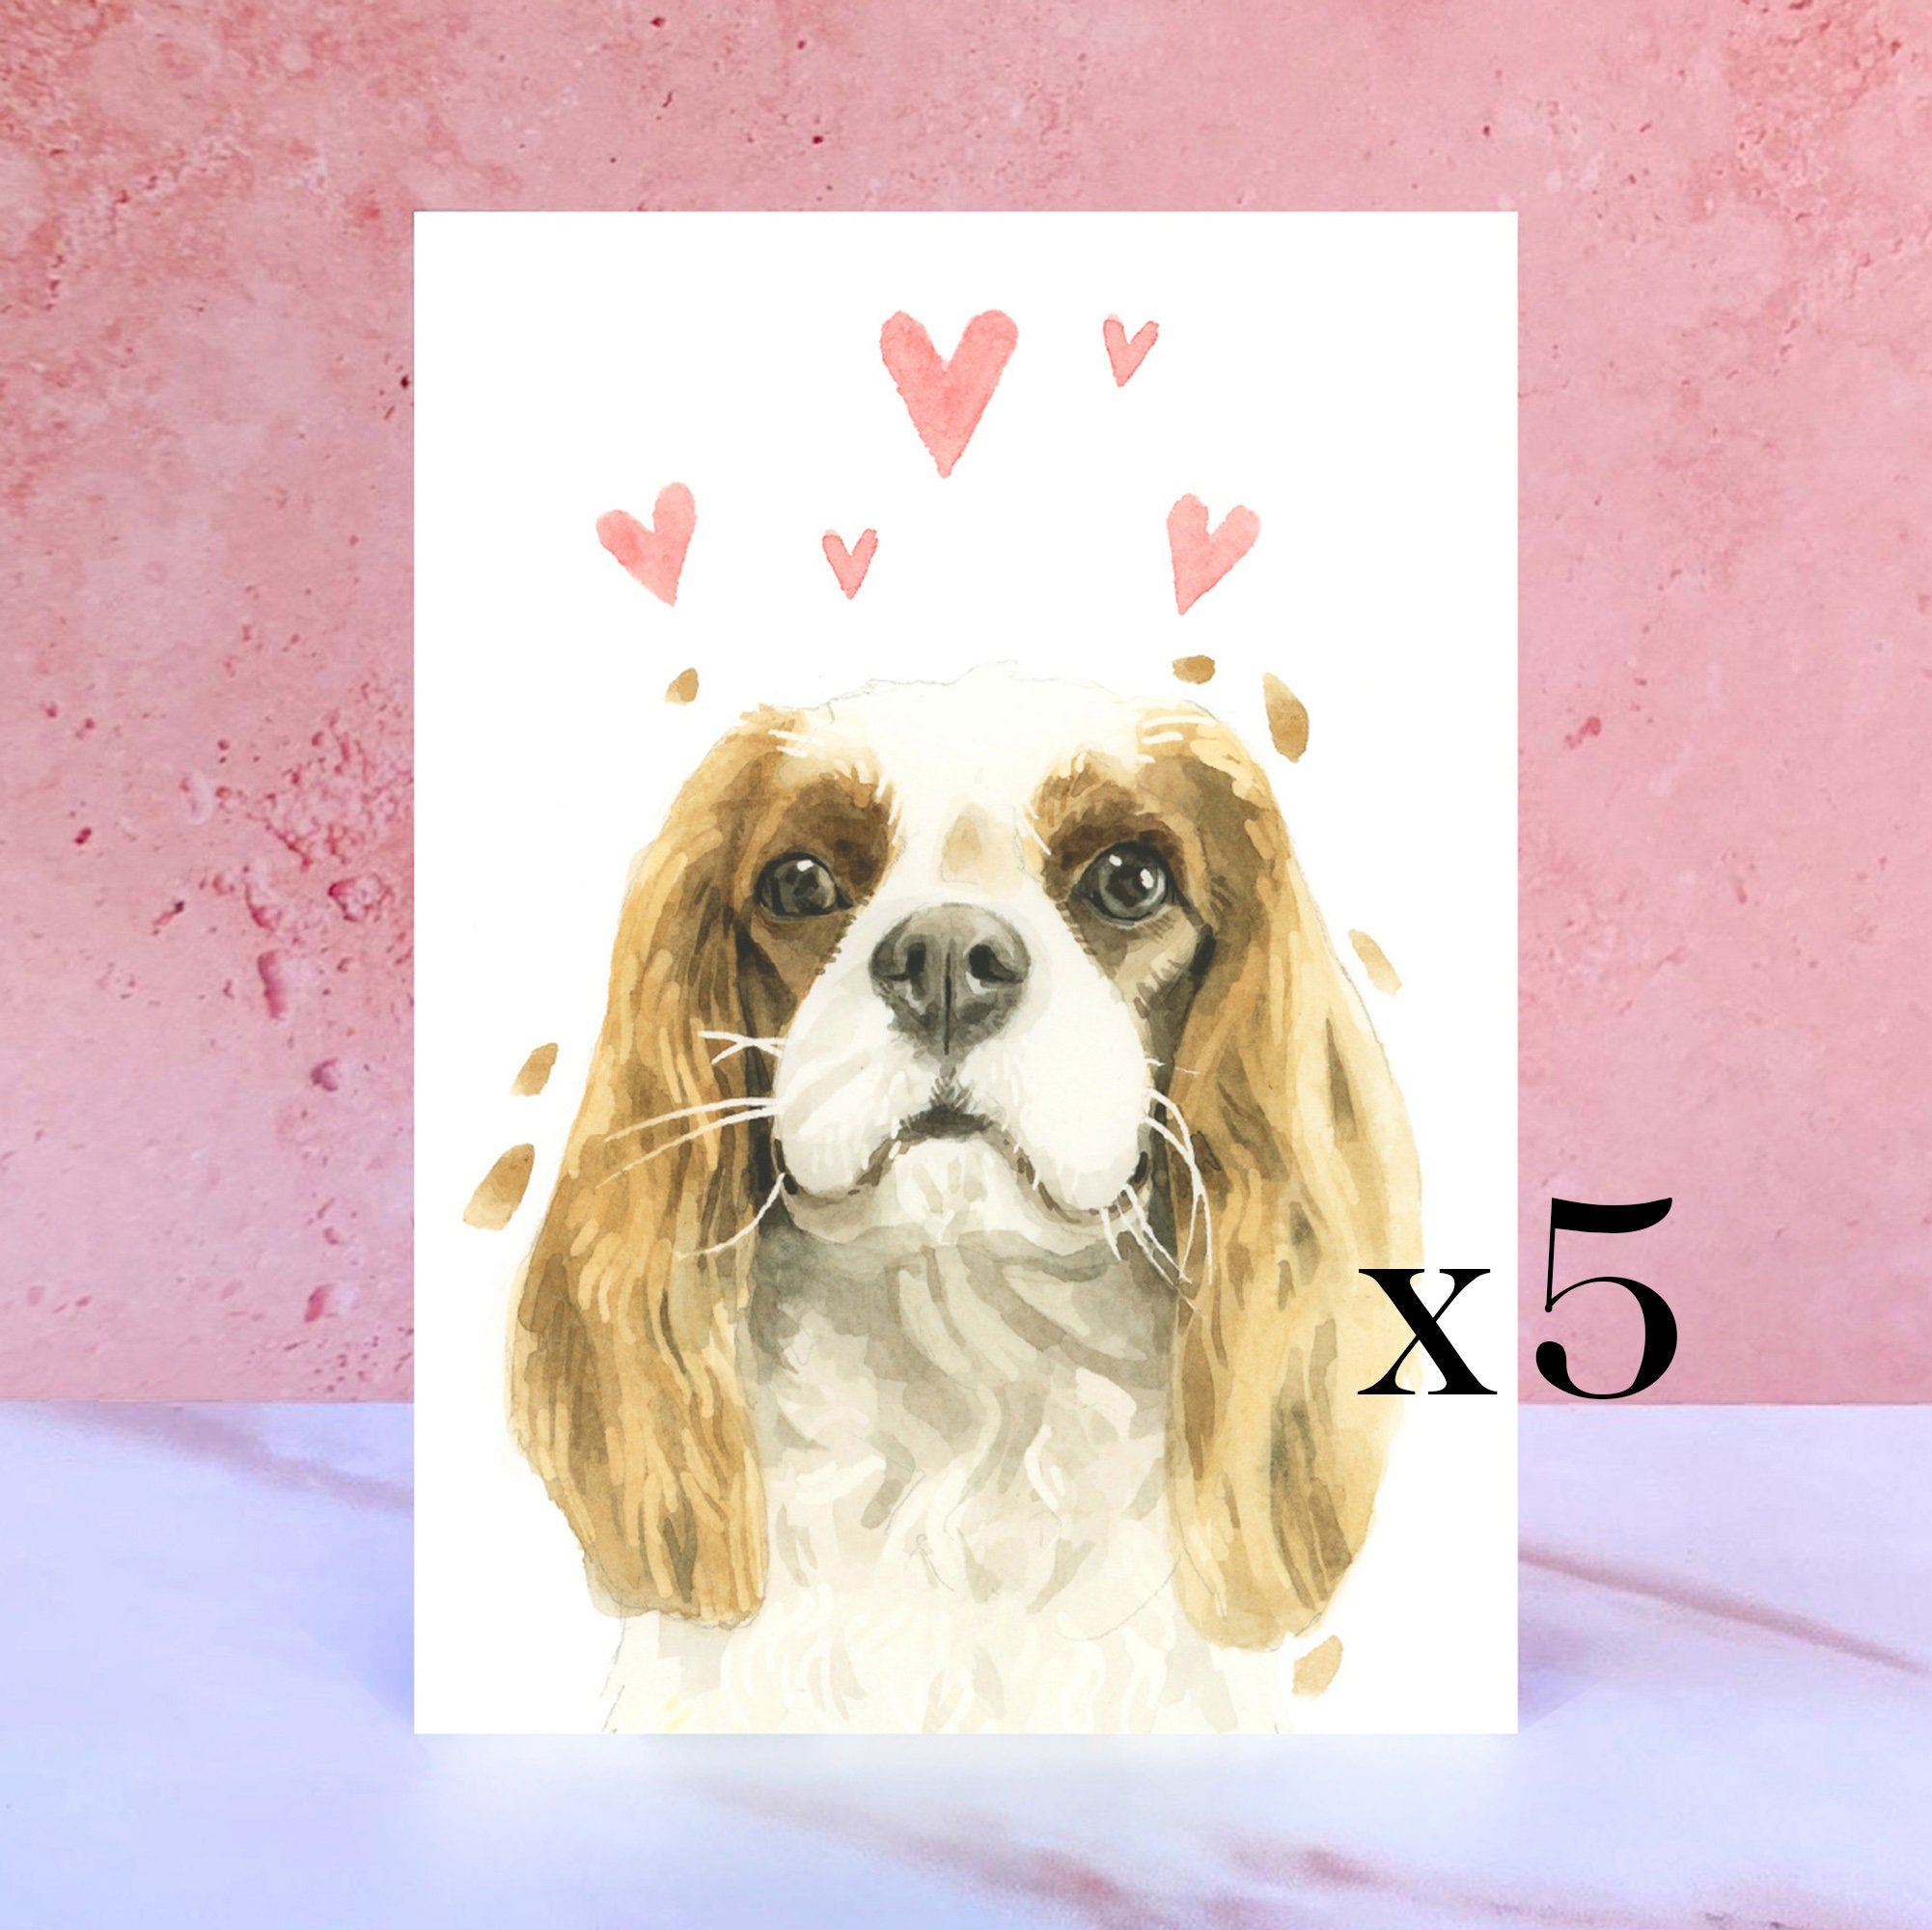 Pack of 5 Cavalier King Charles Spaniel Licks & Kisses Card for Valentines, Anniversaries and from the Dog